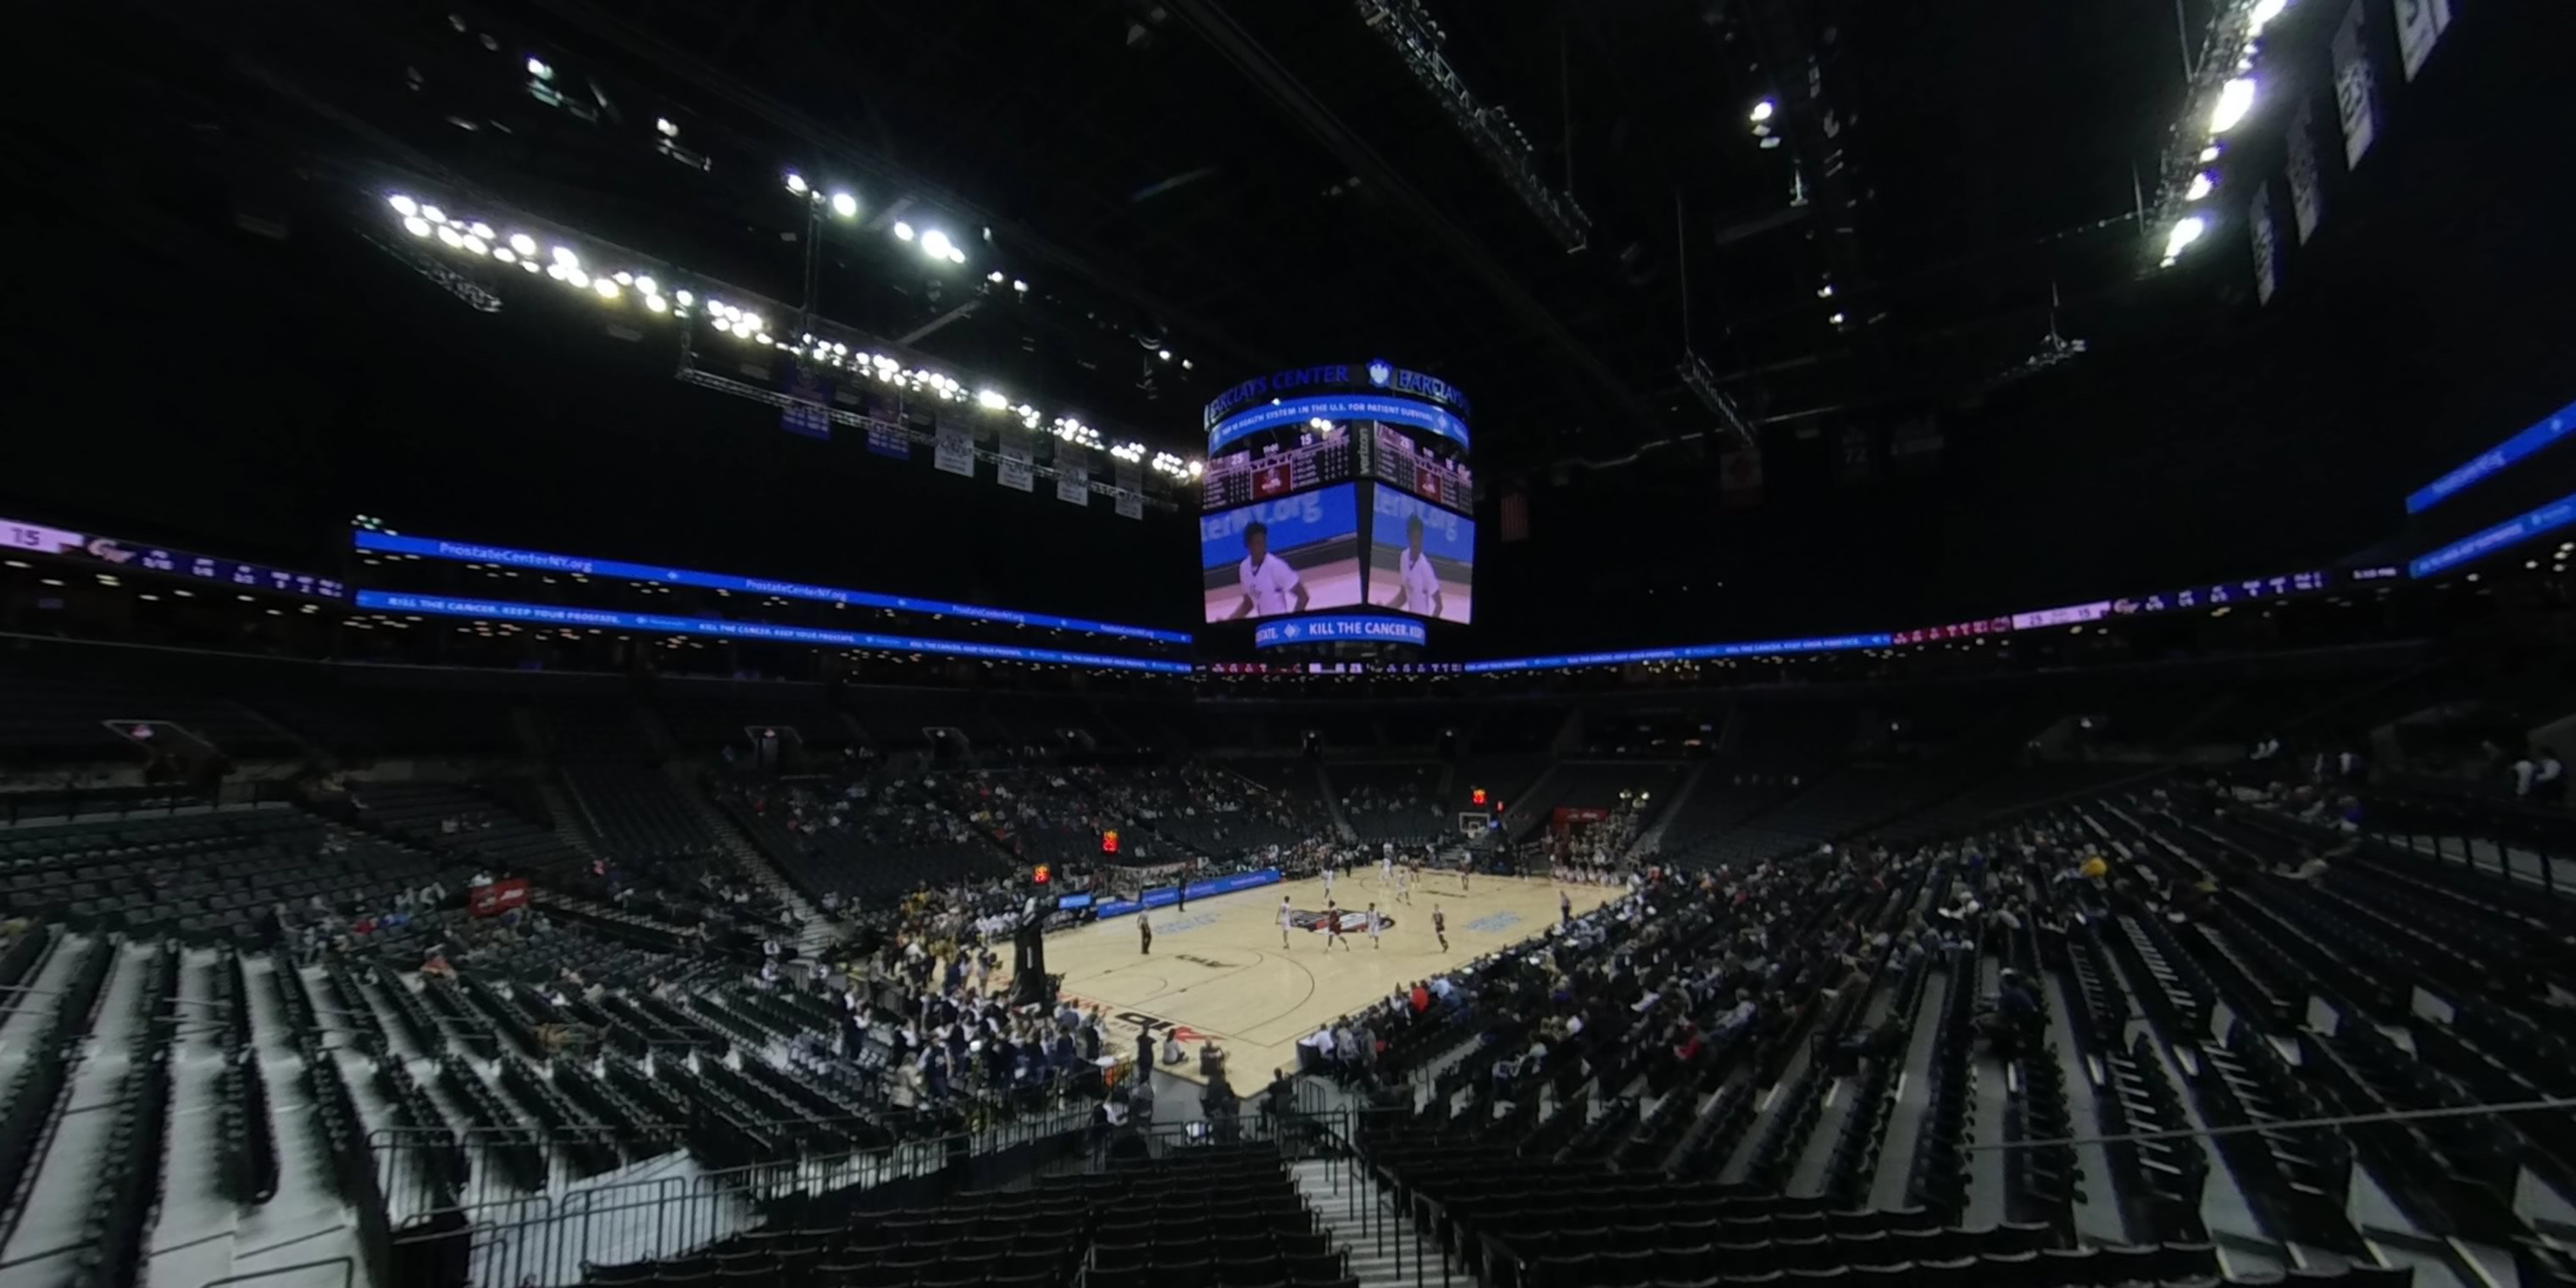 loge box 1 panoramic seat view  for basketball - barclays center